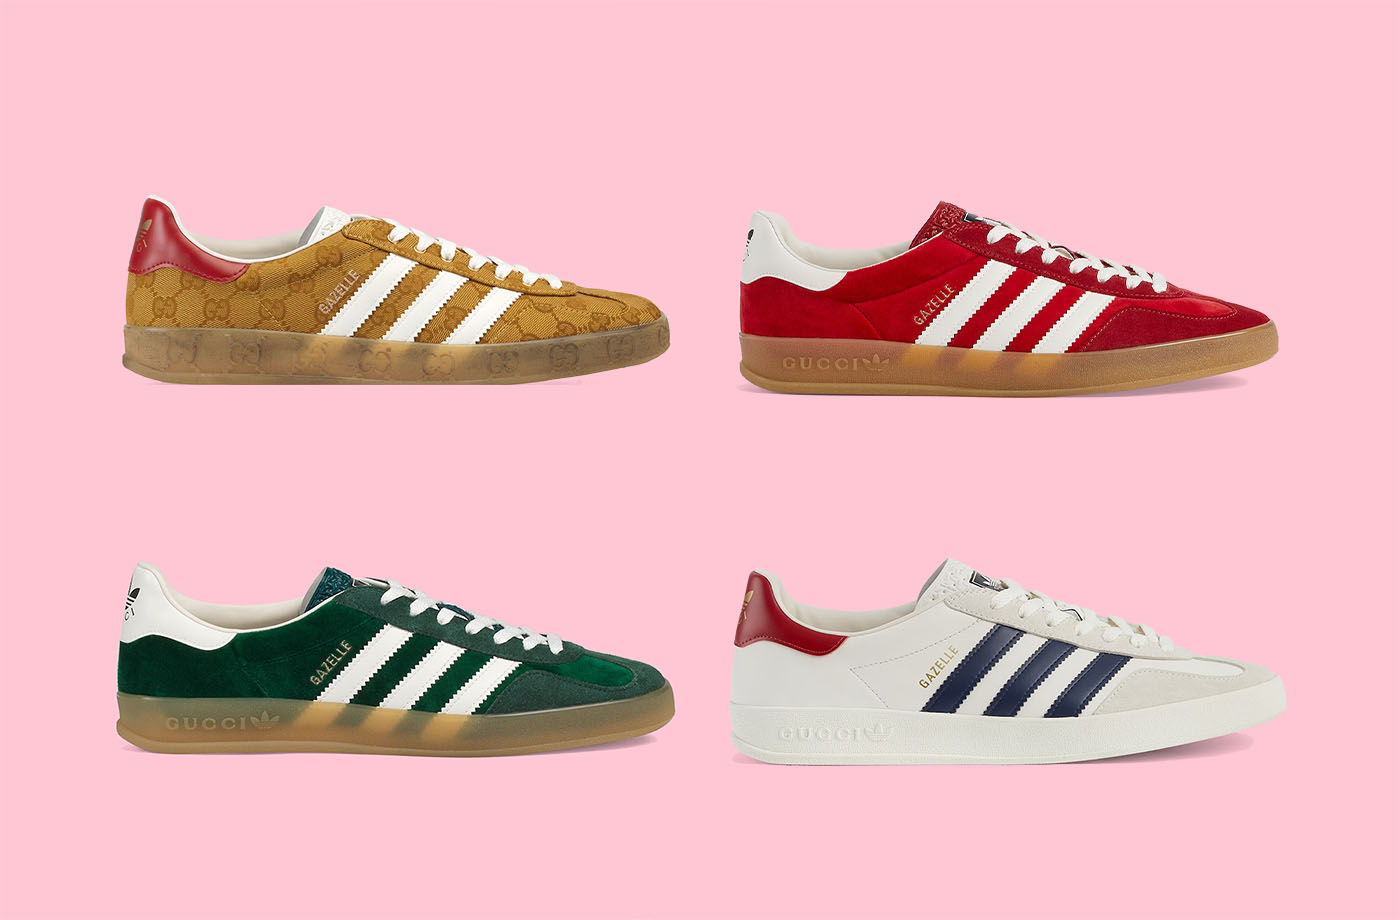 Why Adidas Gazelle Sneakers Are Suddenly So Popular | lupon.gov.ph